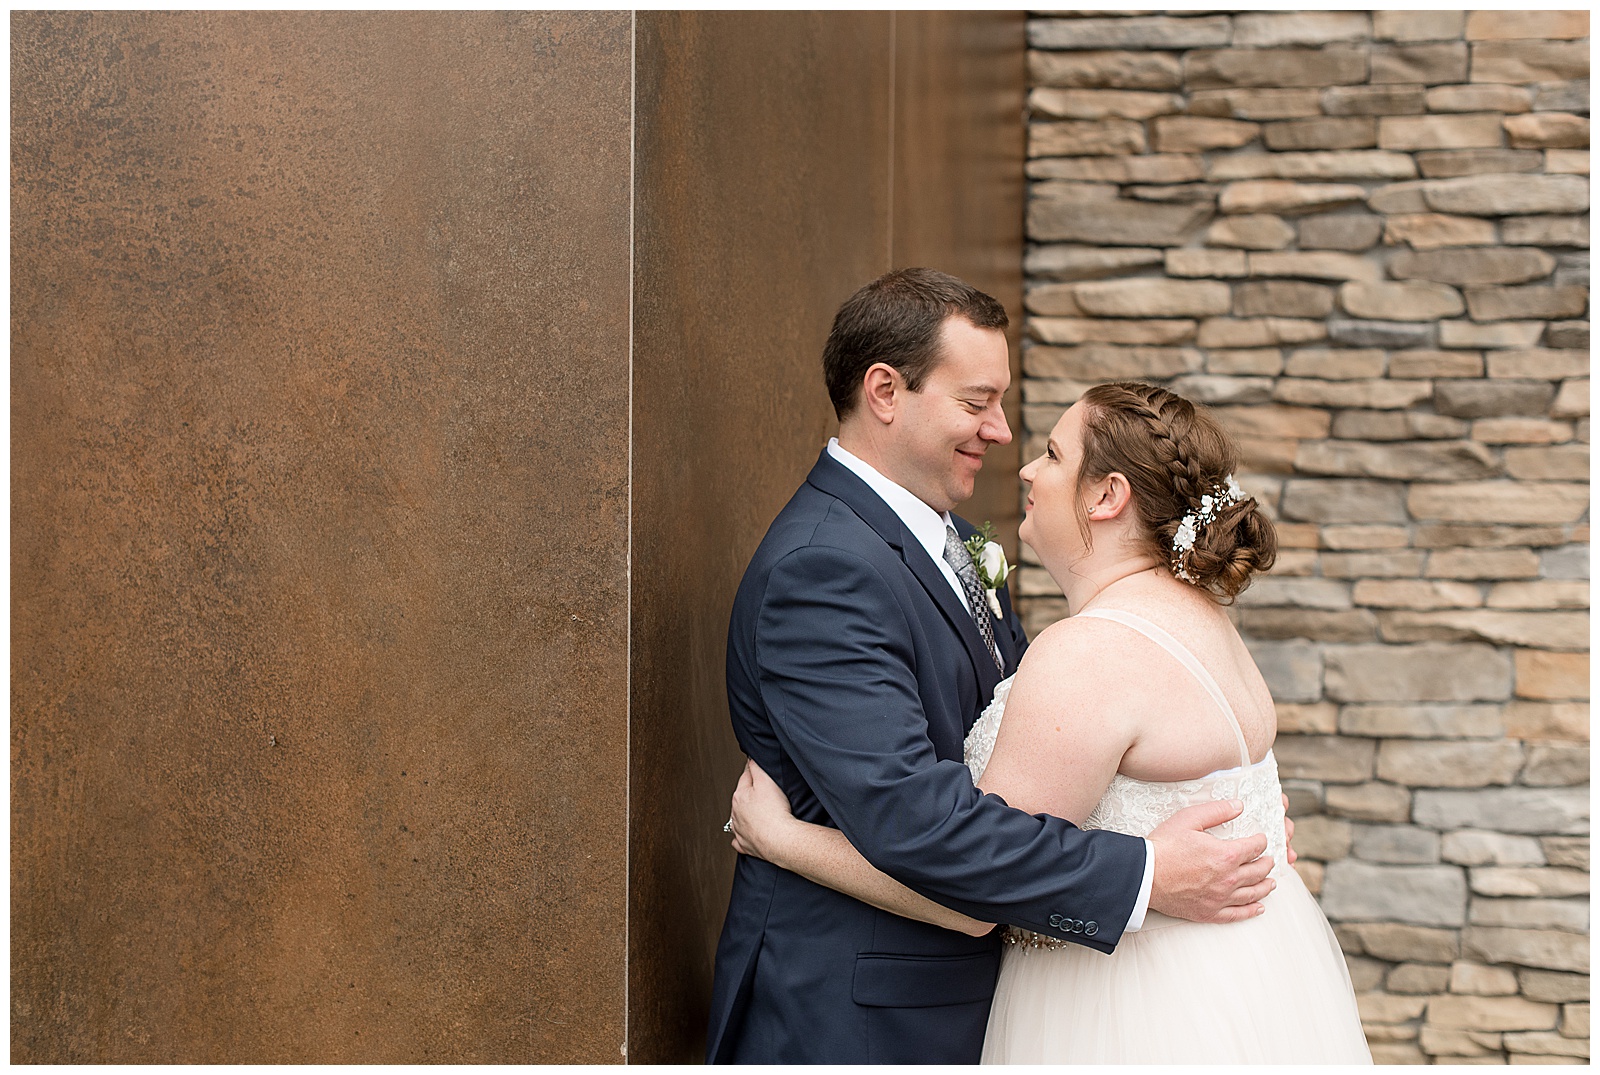 couple smiling and embracing by wooden and stone walls at eden resort in lancaster pennsylvania